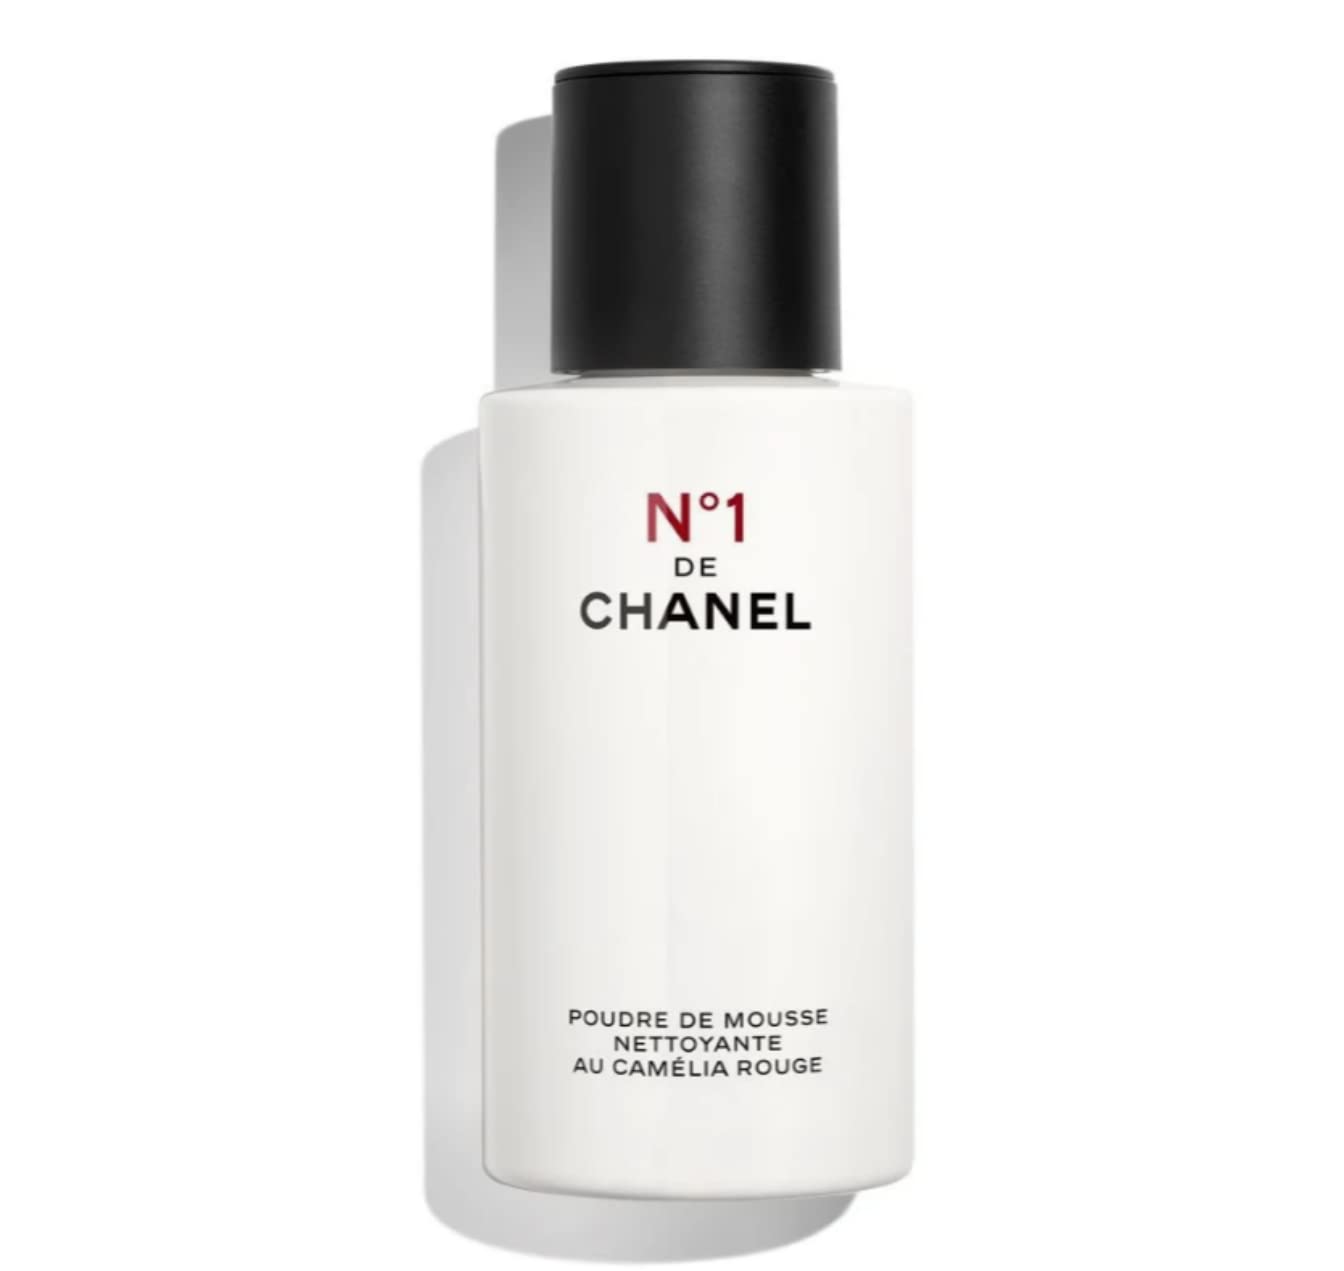 Chanel No.1 de Chanel Red Camellia Powder to Foam Cleanser, 25 g